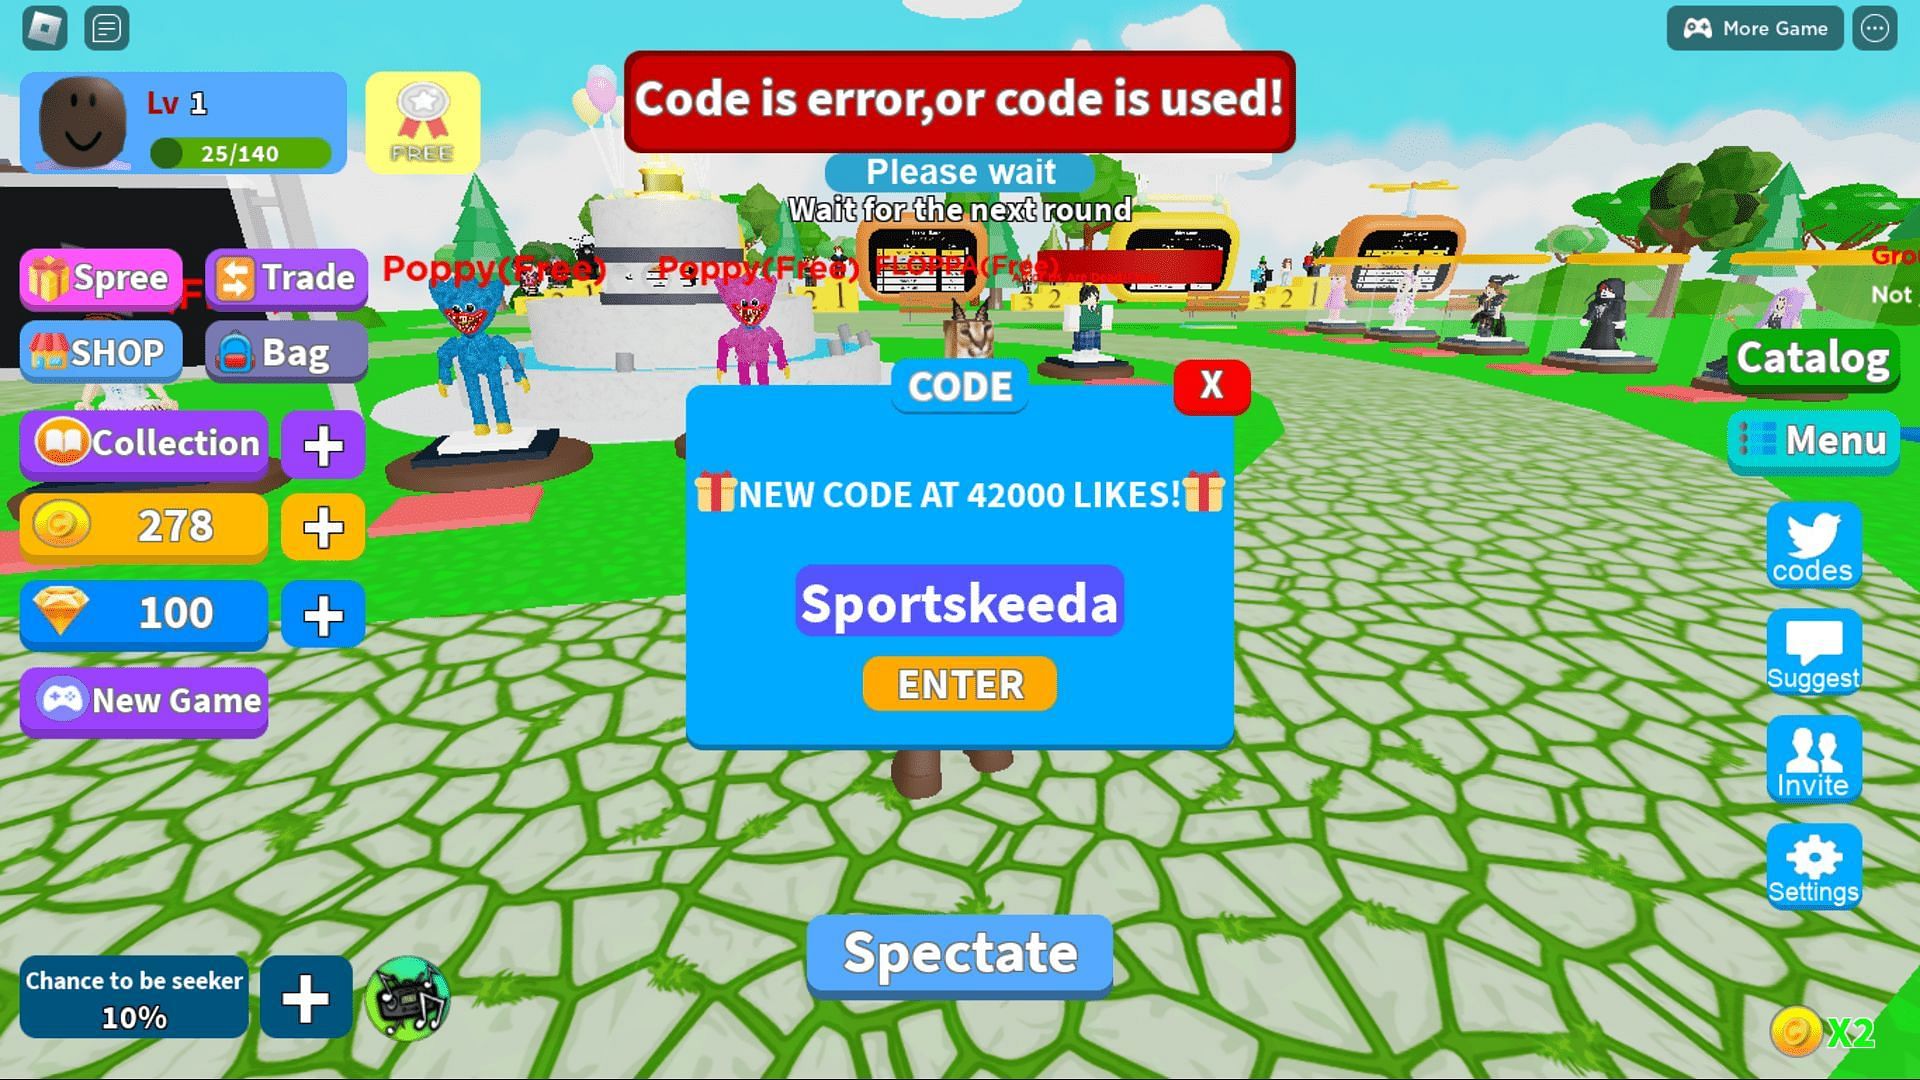 Troubleshoot codes in Hide and Seek Transform with ease (Image via Roblox)